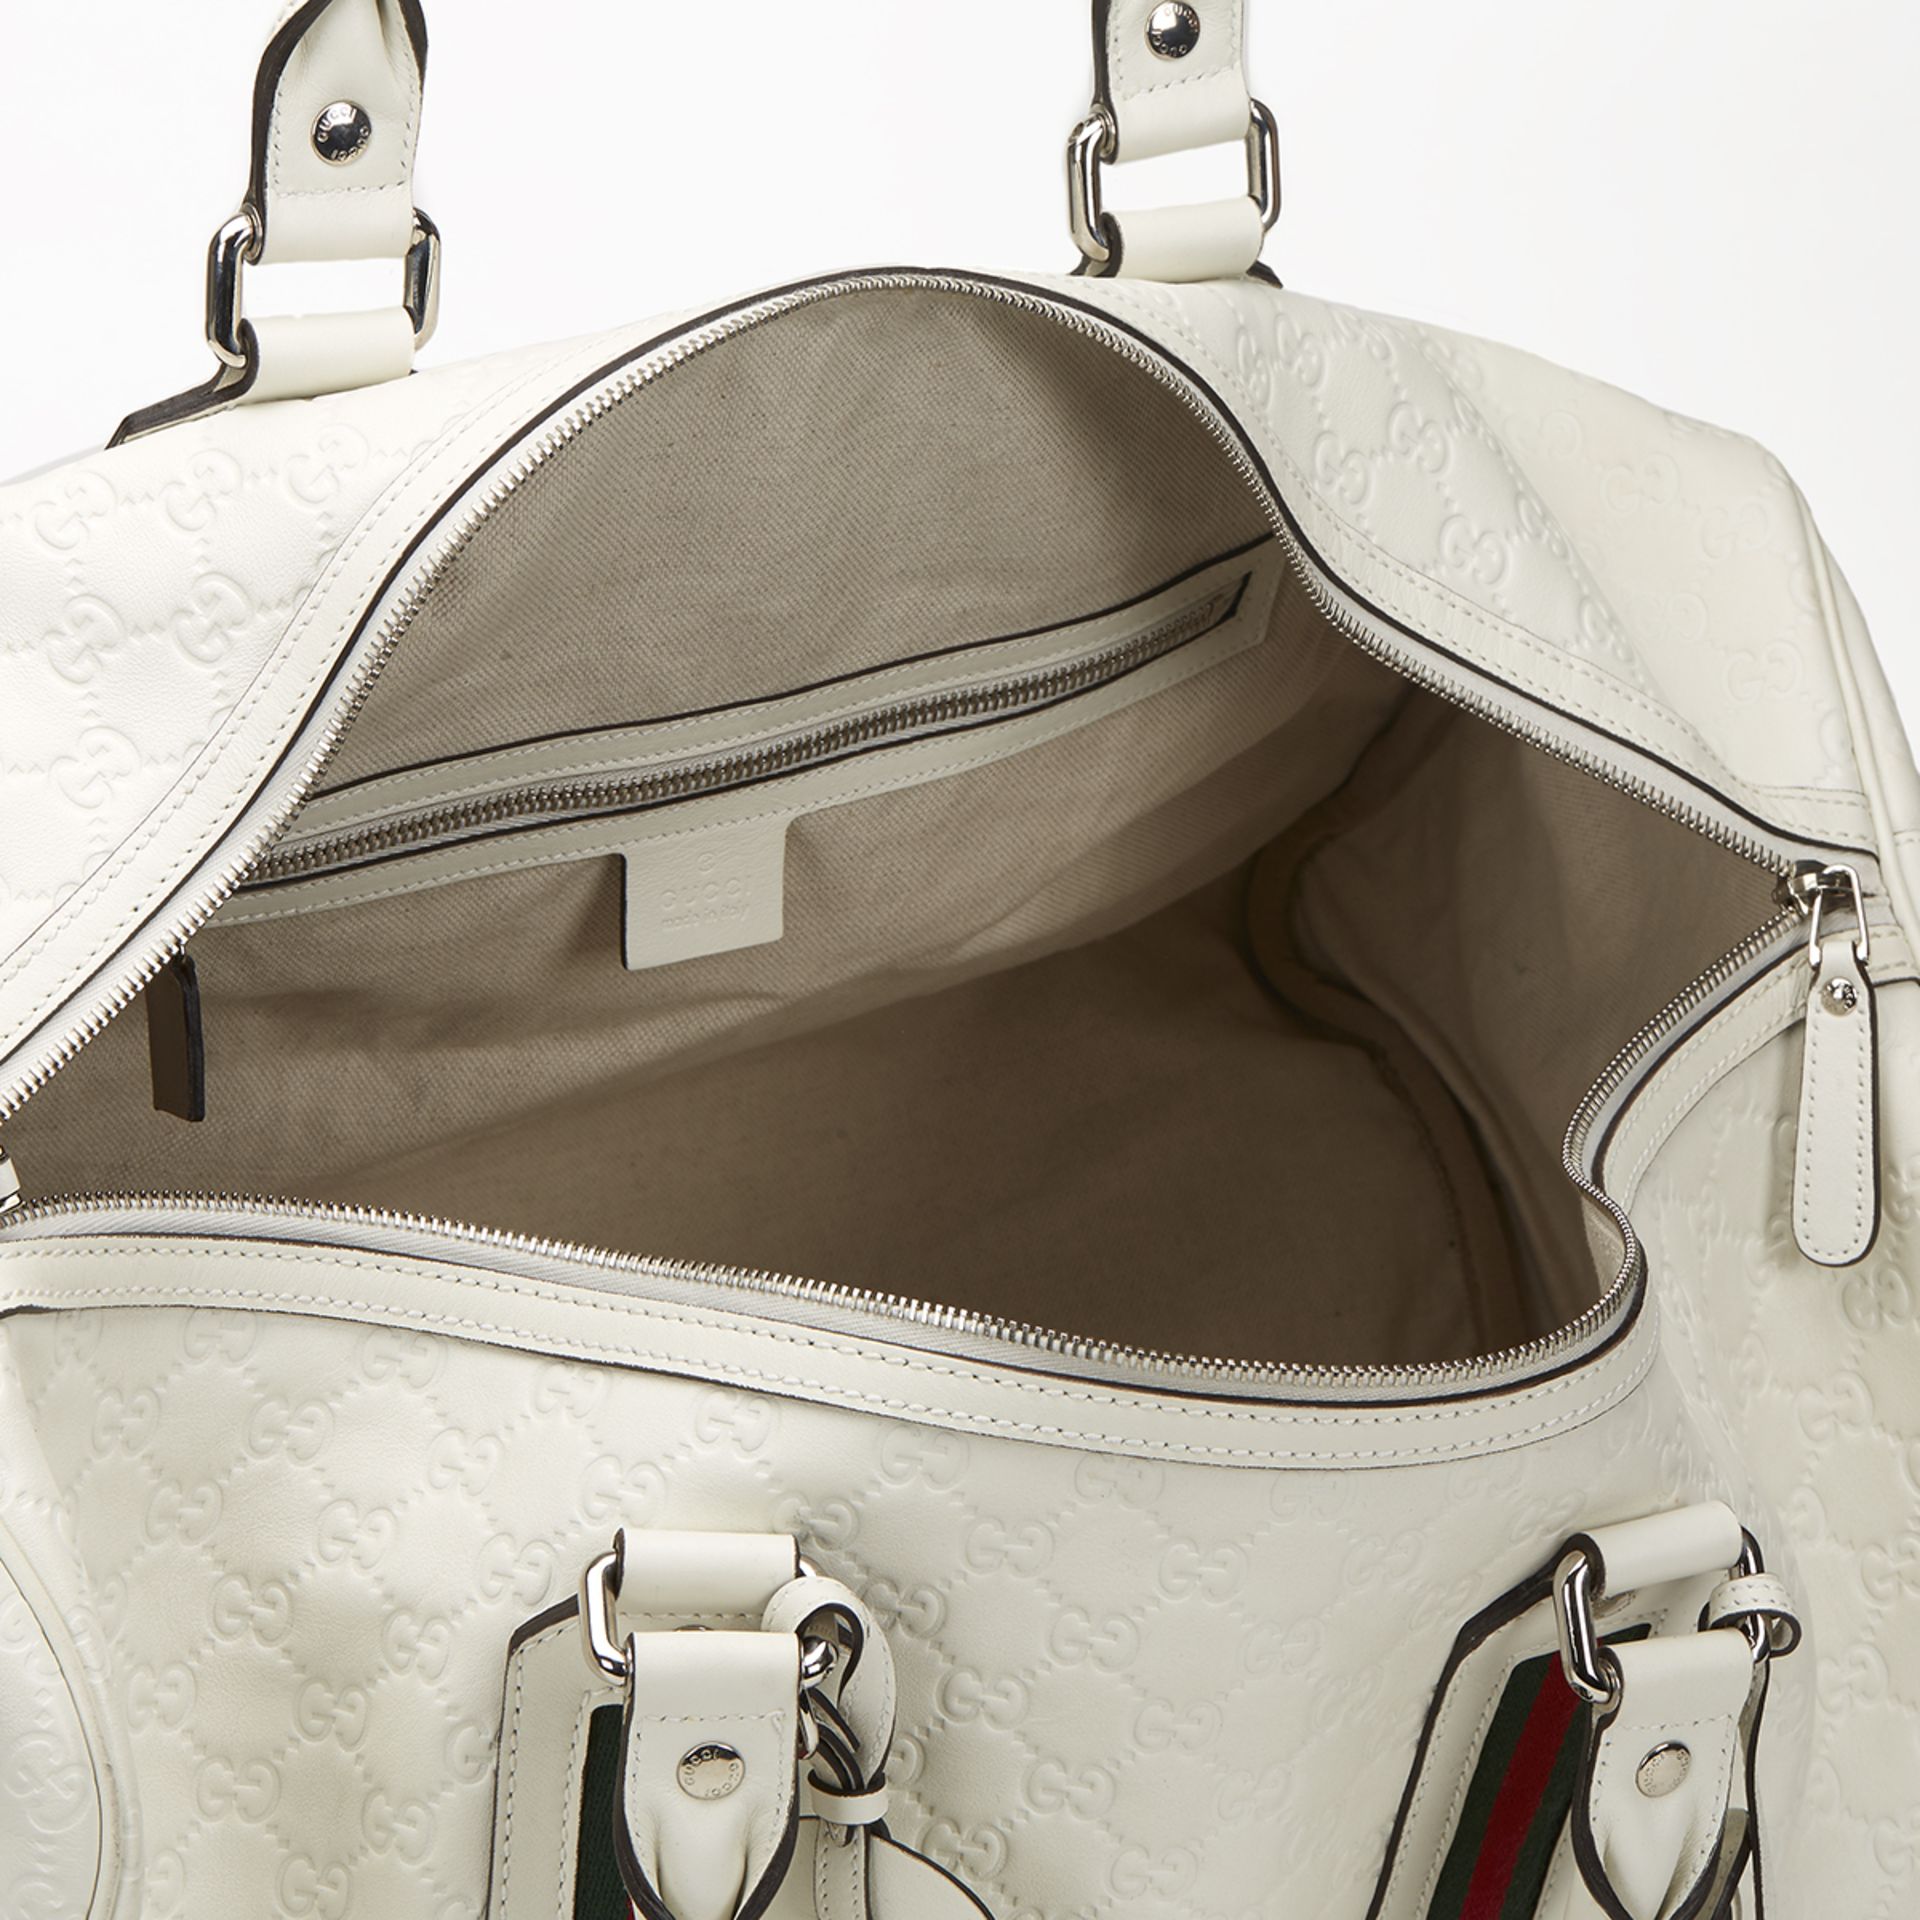 Gucci, Holdall - Image 7 of 8